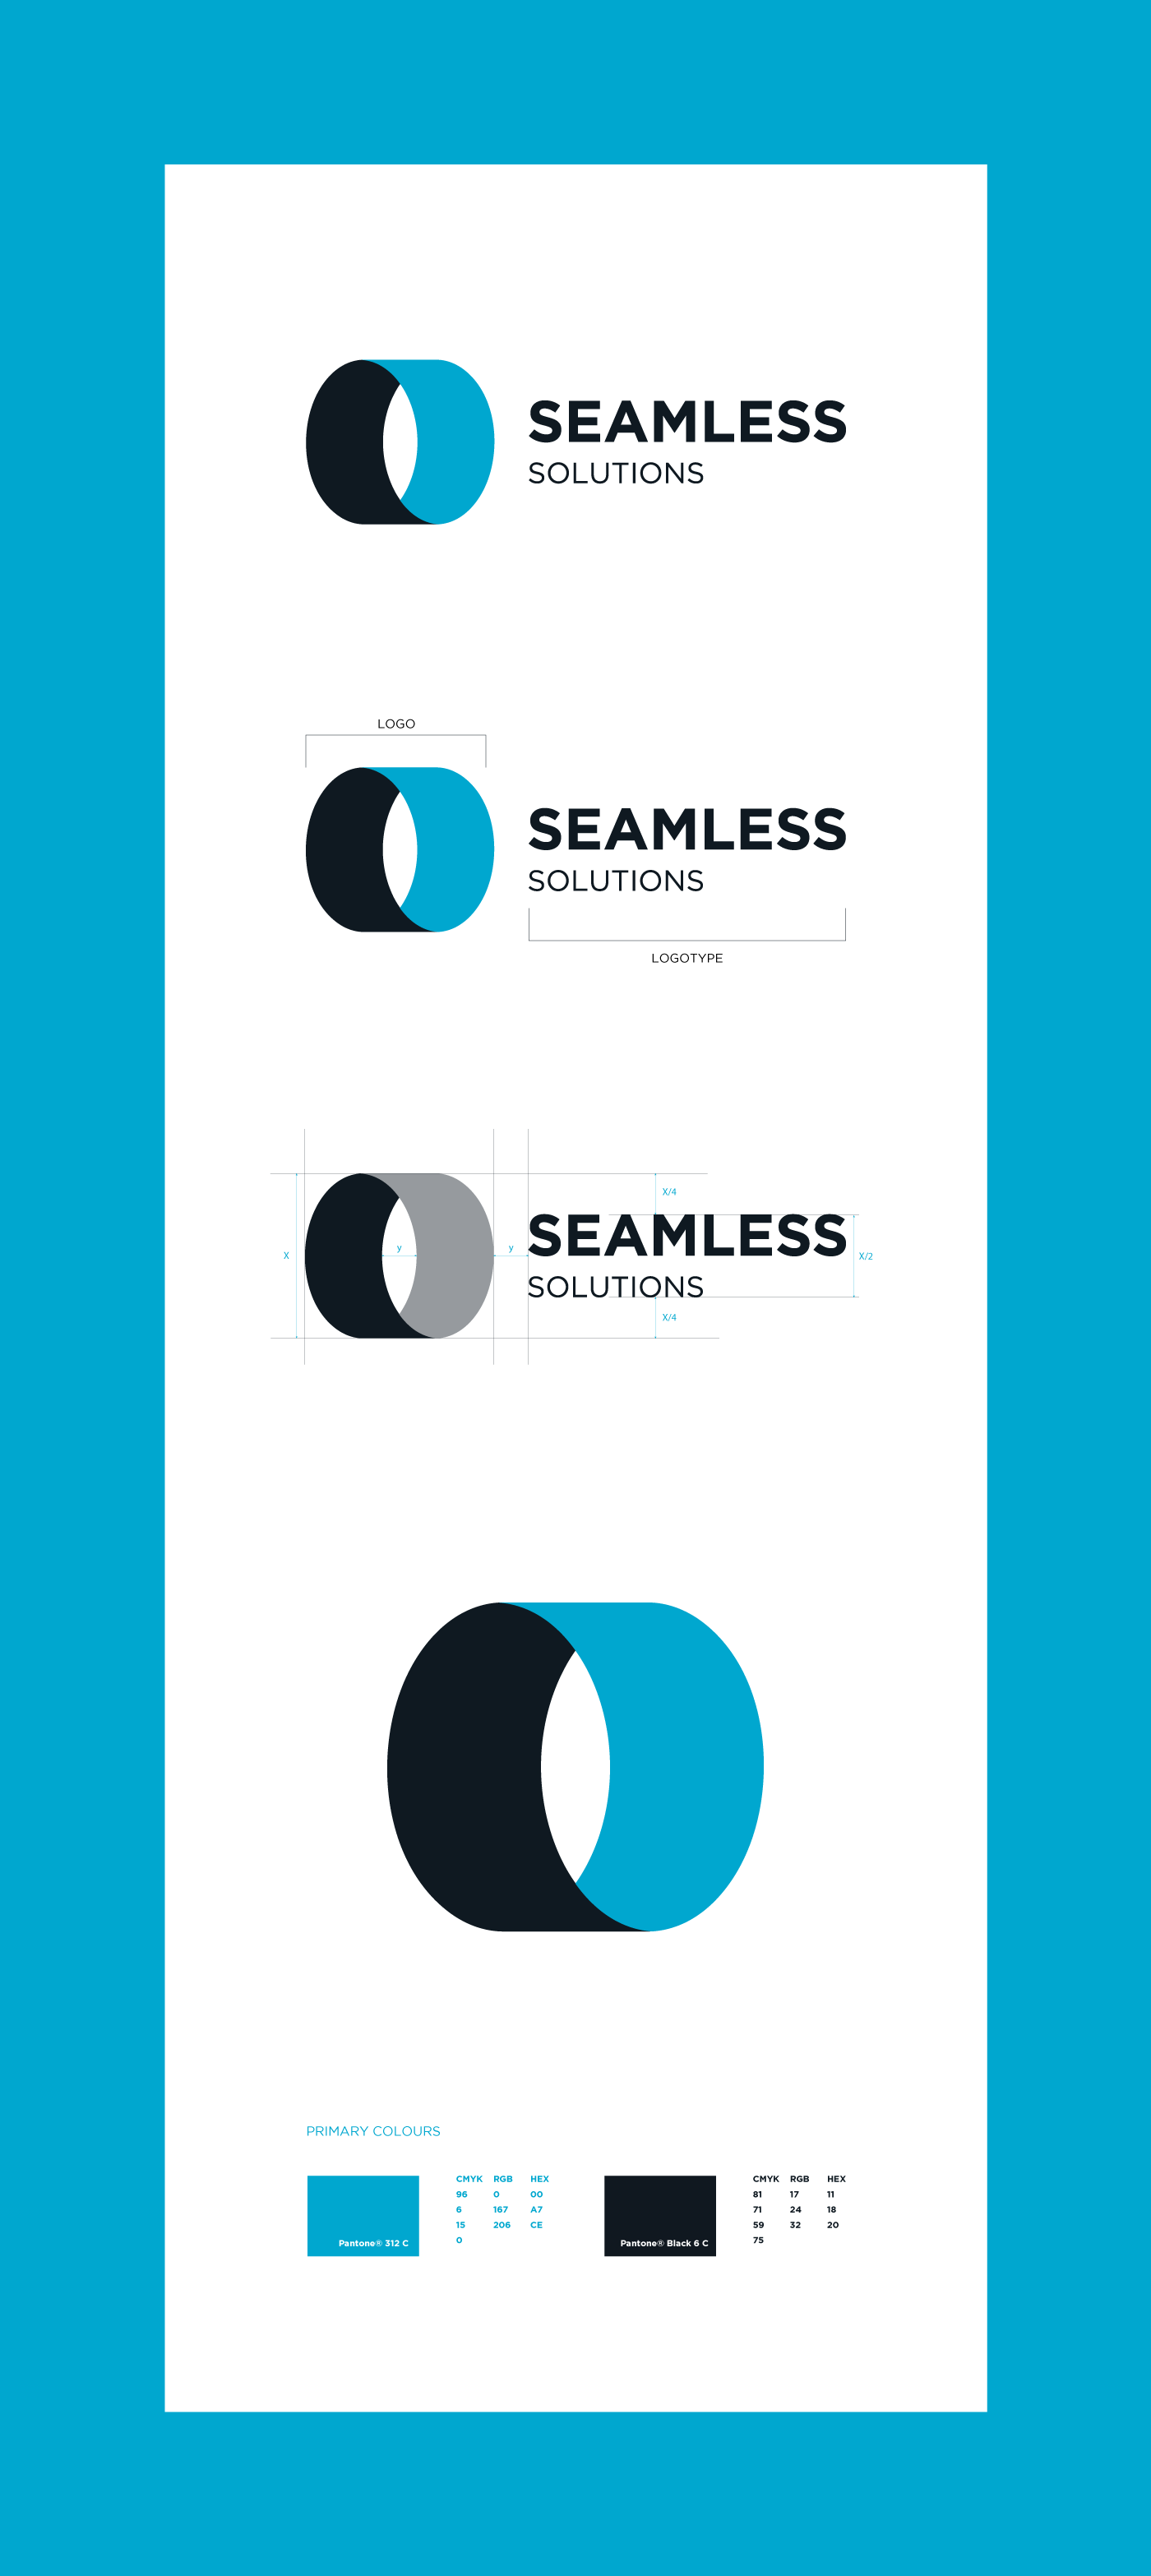 Seamless Solutions